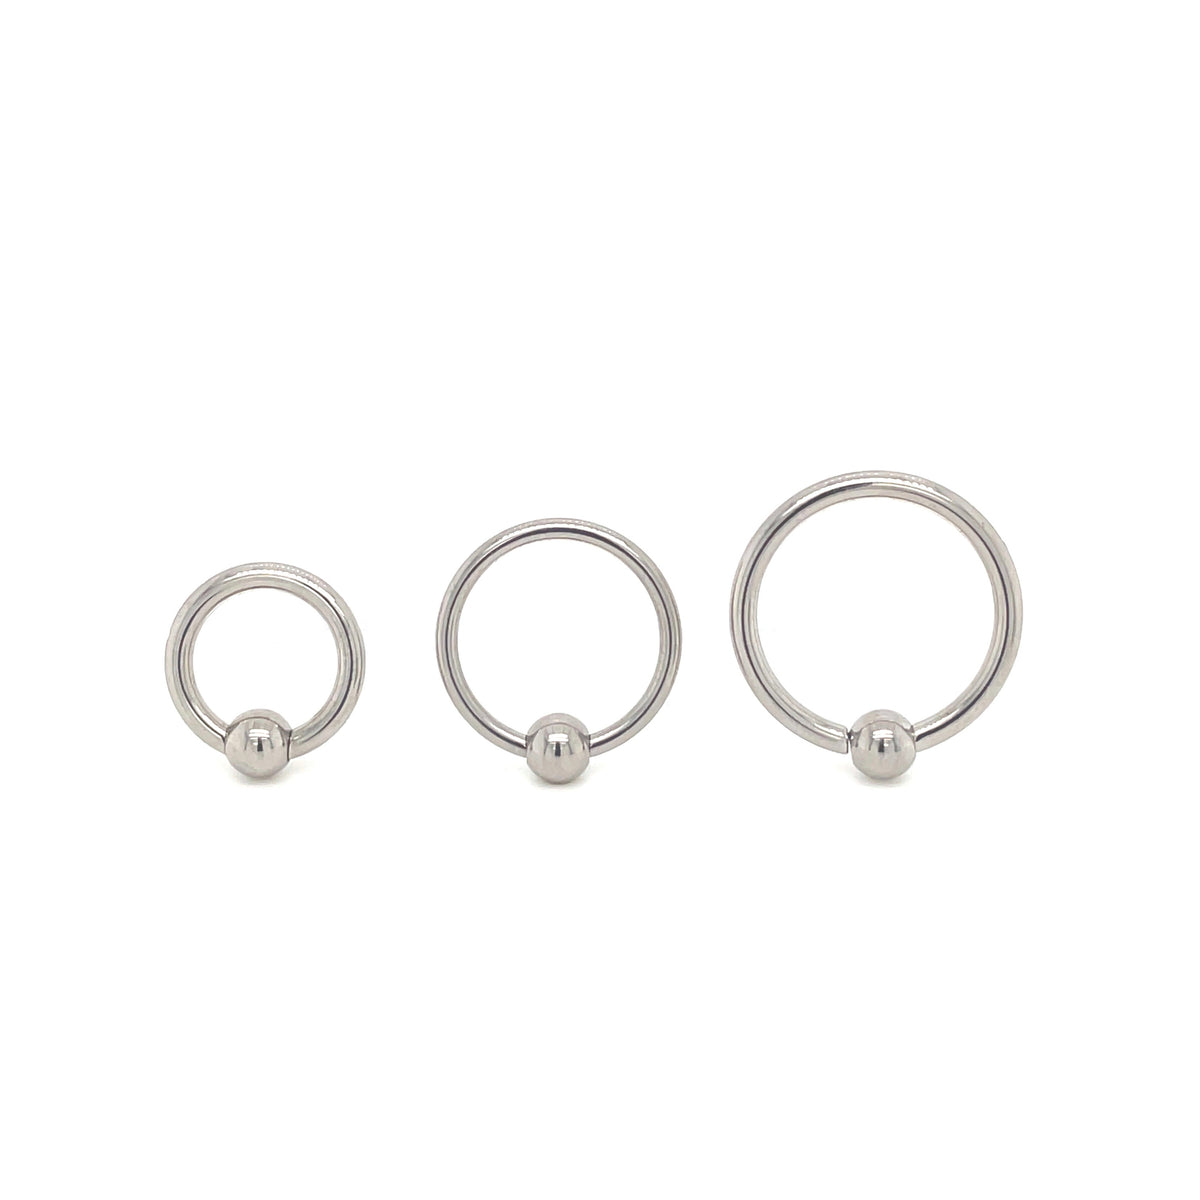 Buy Dynamique Basic Captive Bead Rings from 20g to 00g 316L Surgical Steel  at Amazon.in